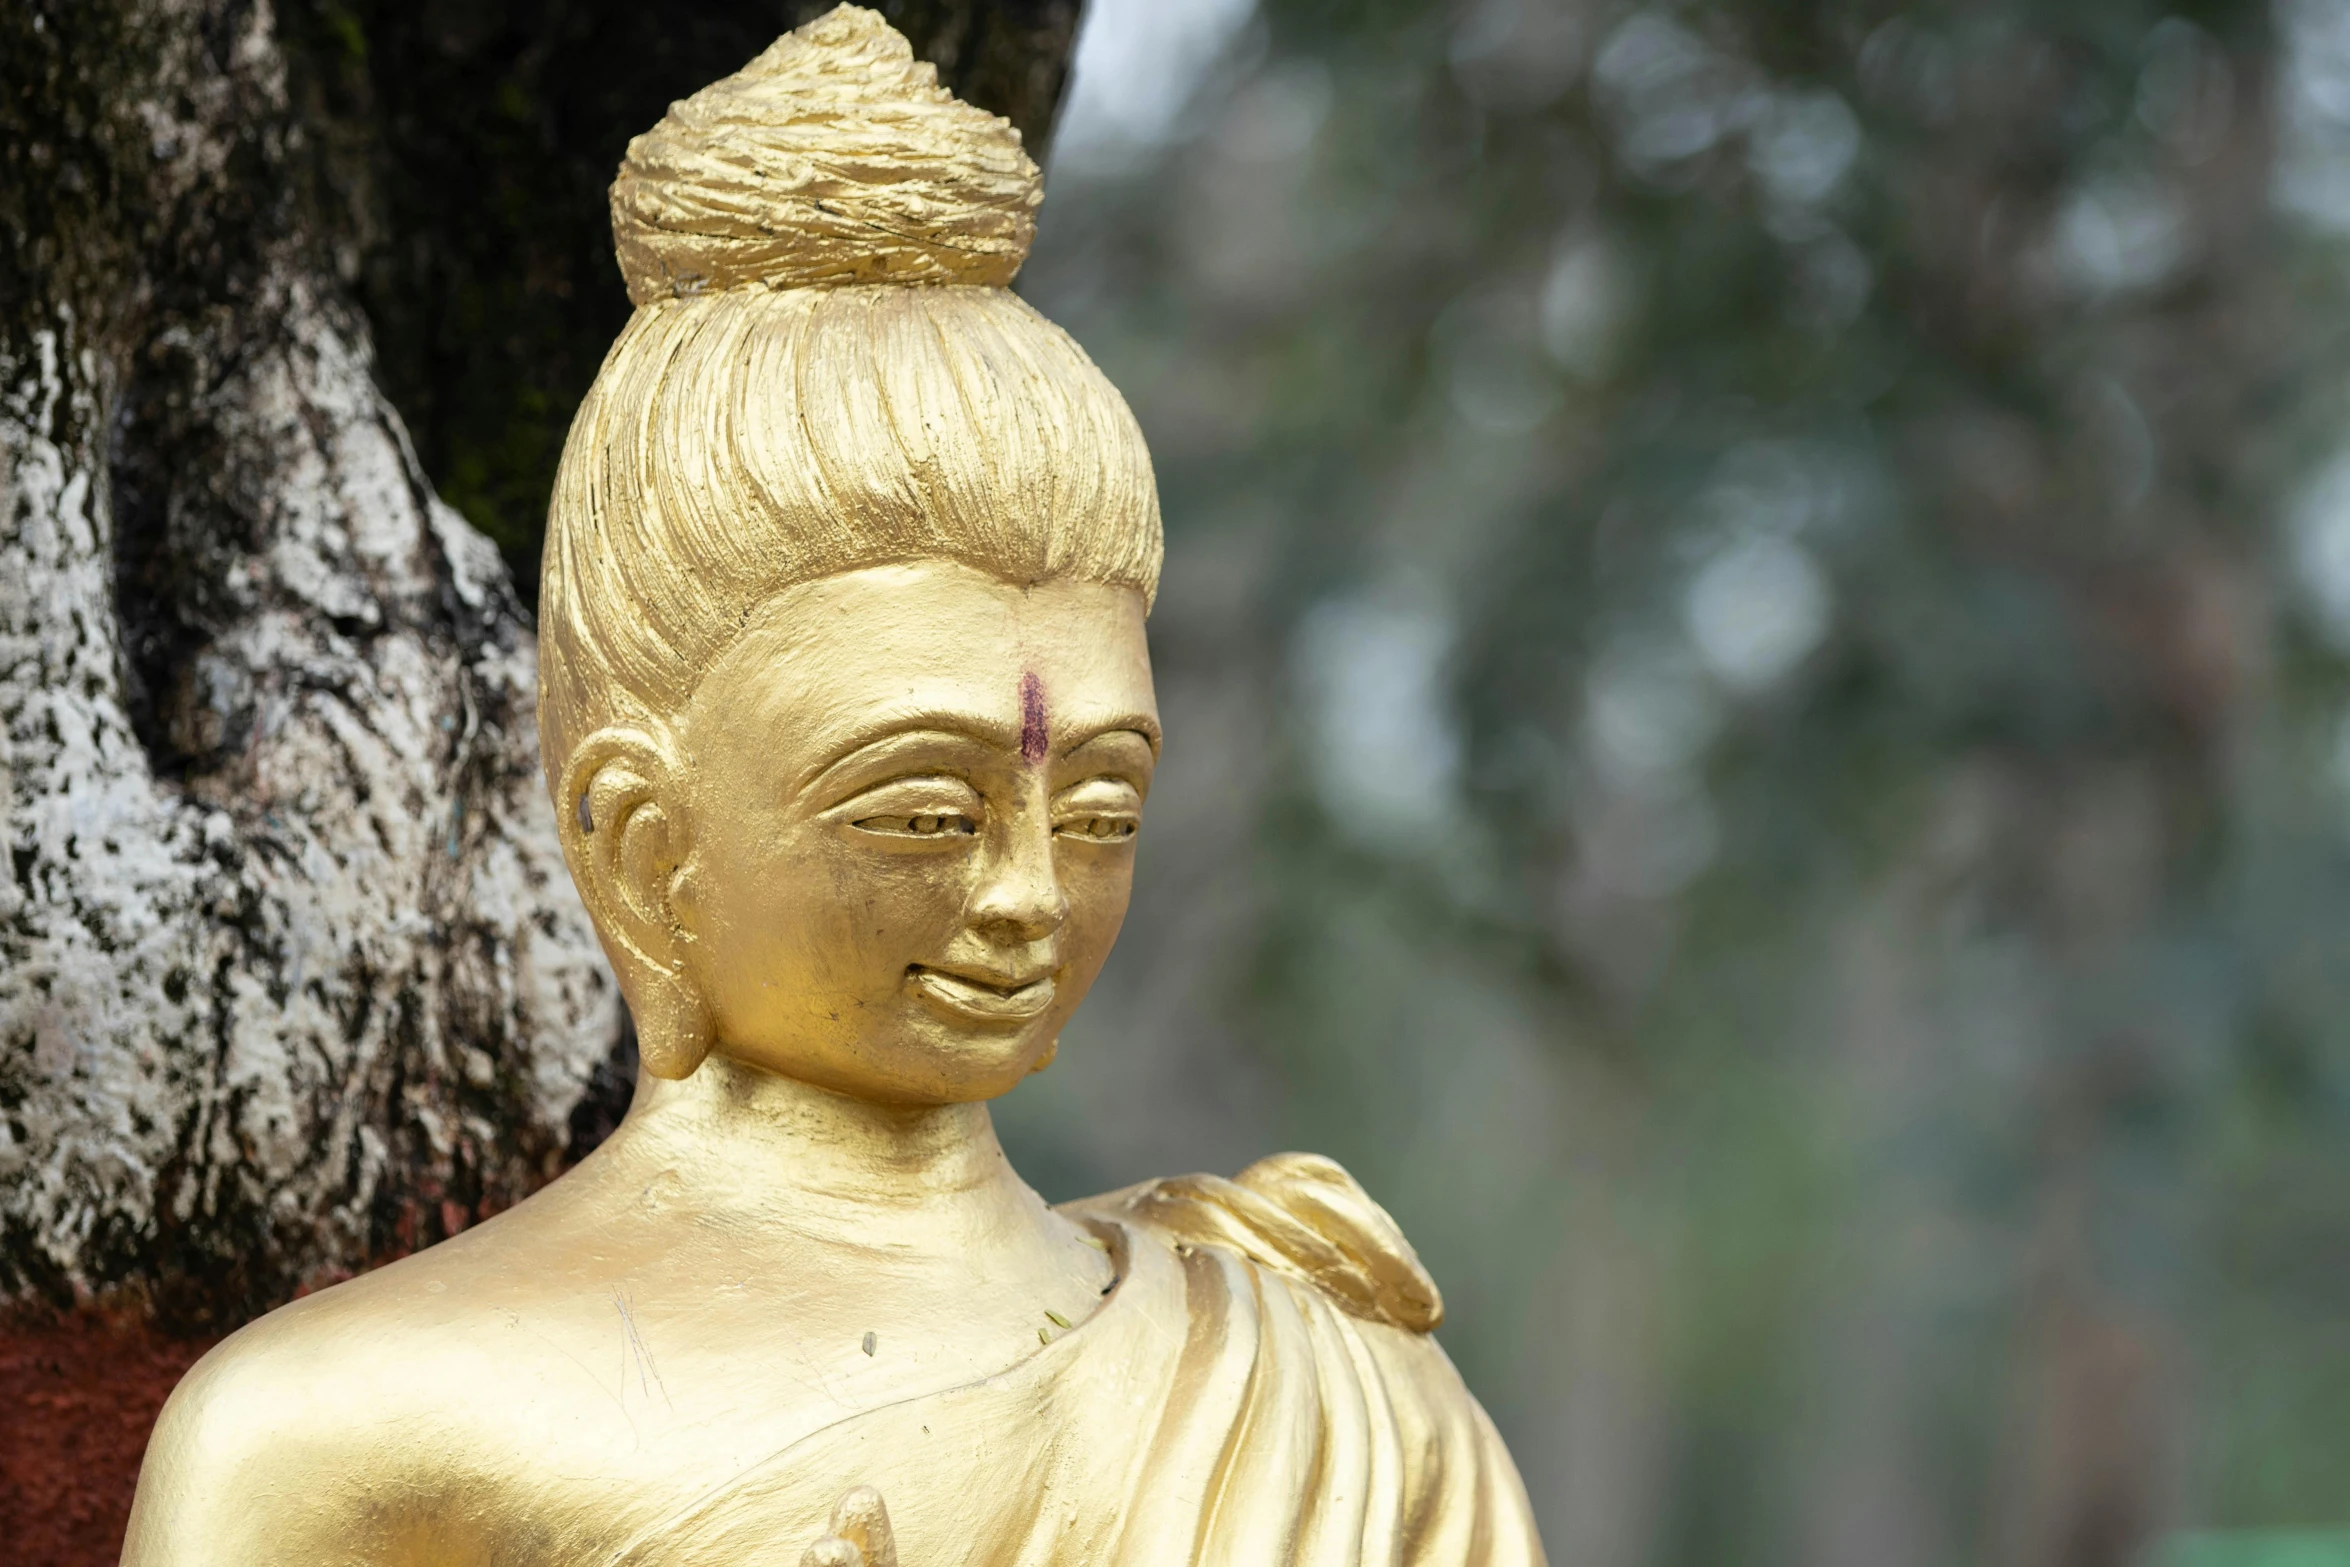 the golden buddha statue is standing in front of the tree